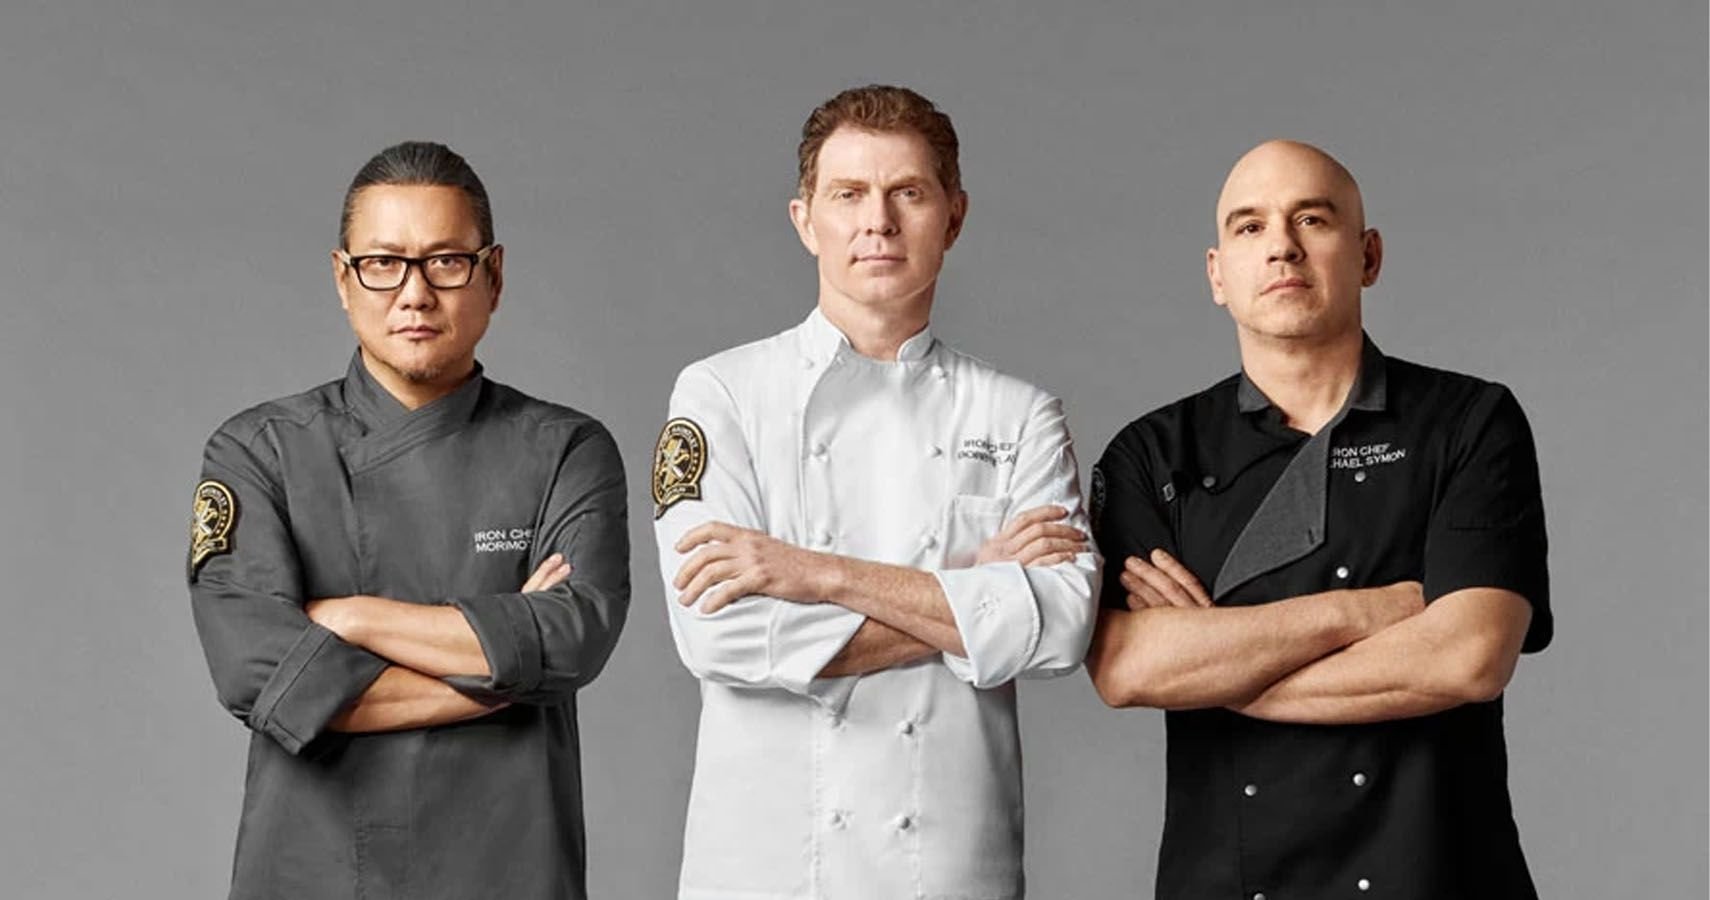 Open Hearts, Empty Stomachs: Ranking The 11 Iron Chefs By Wins (Plus 9 More We'd Love To See Compete)